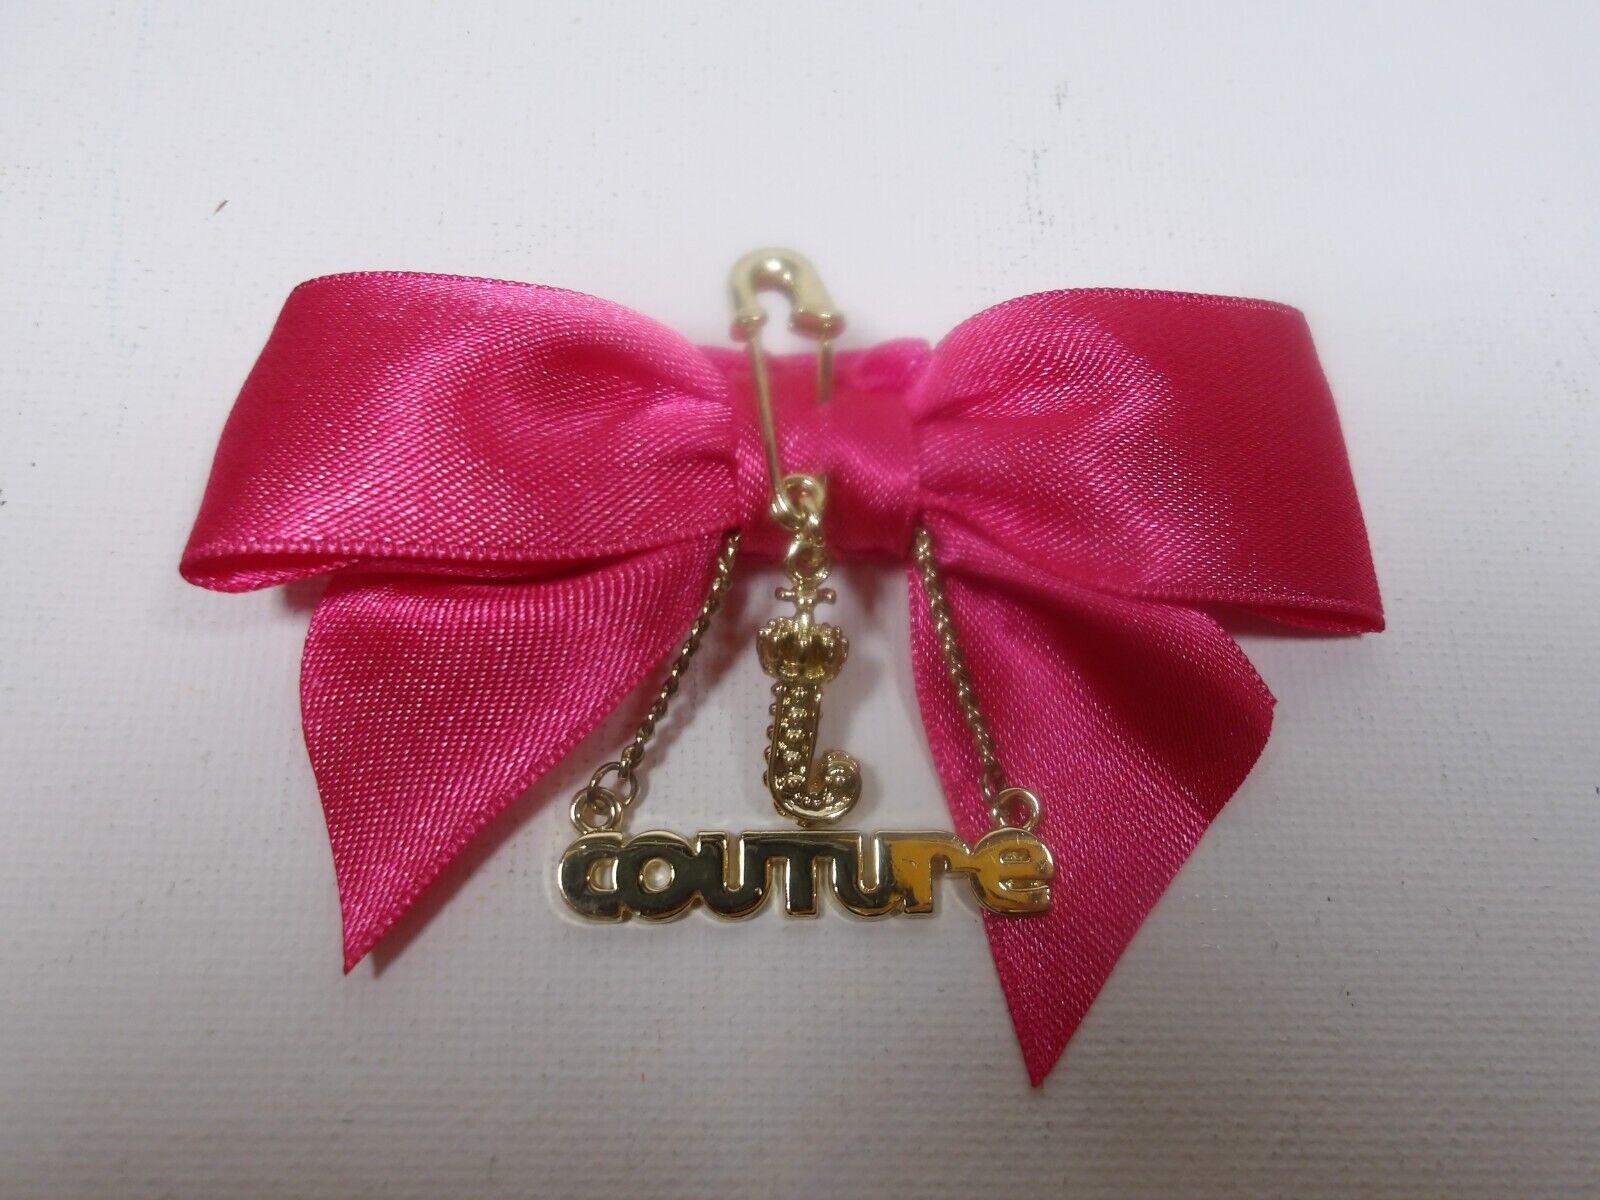 Juicy Couture Pink Bow Decor for Viva La Juicy Perfume Bottle gold tone charms